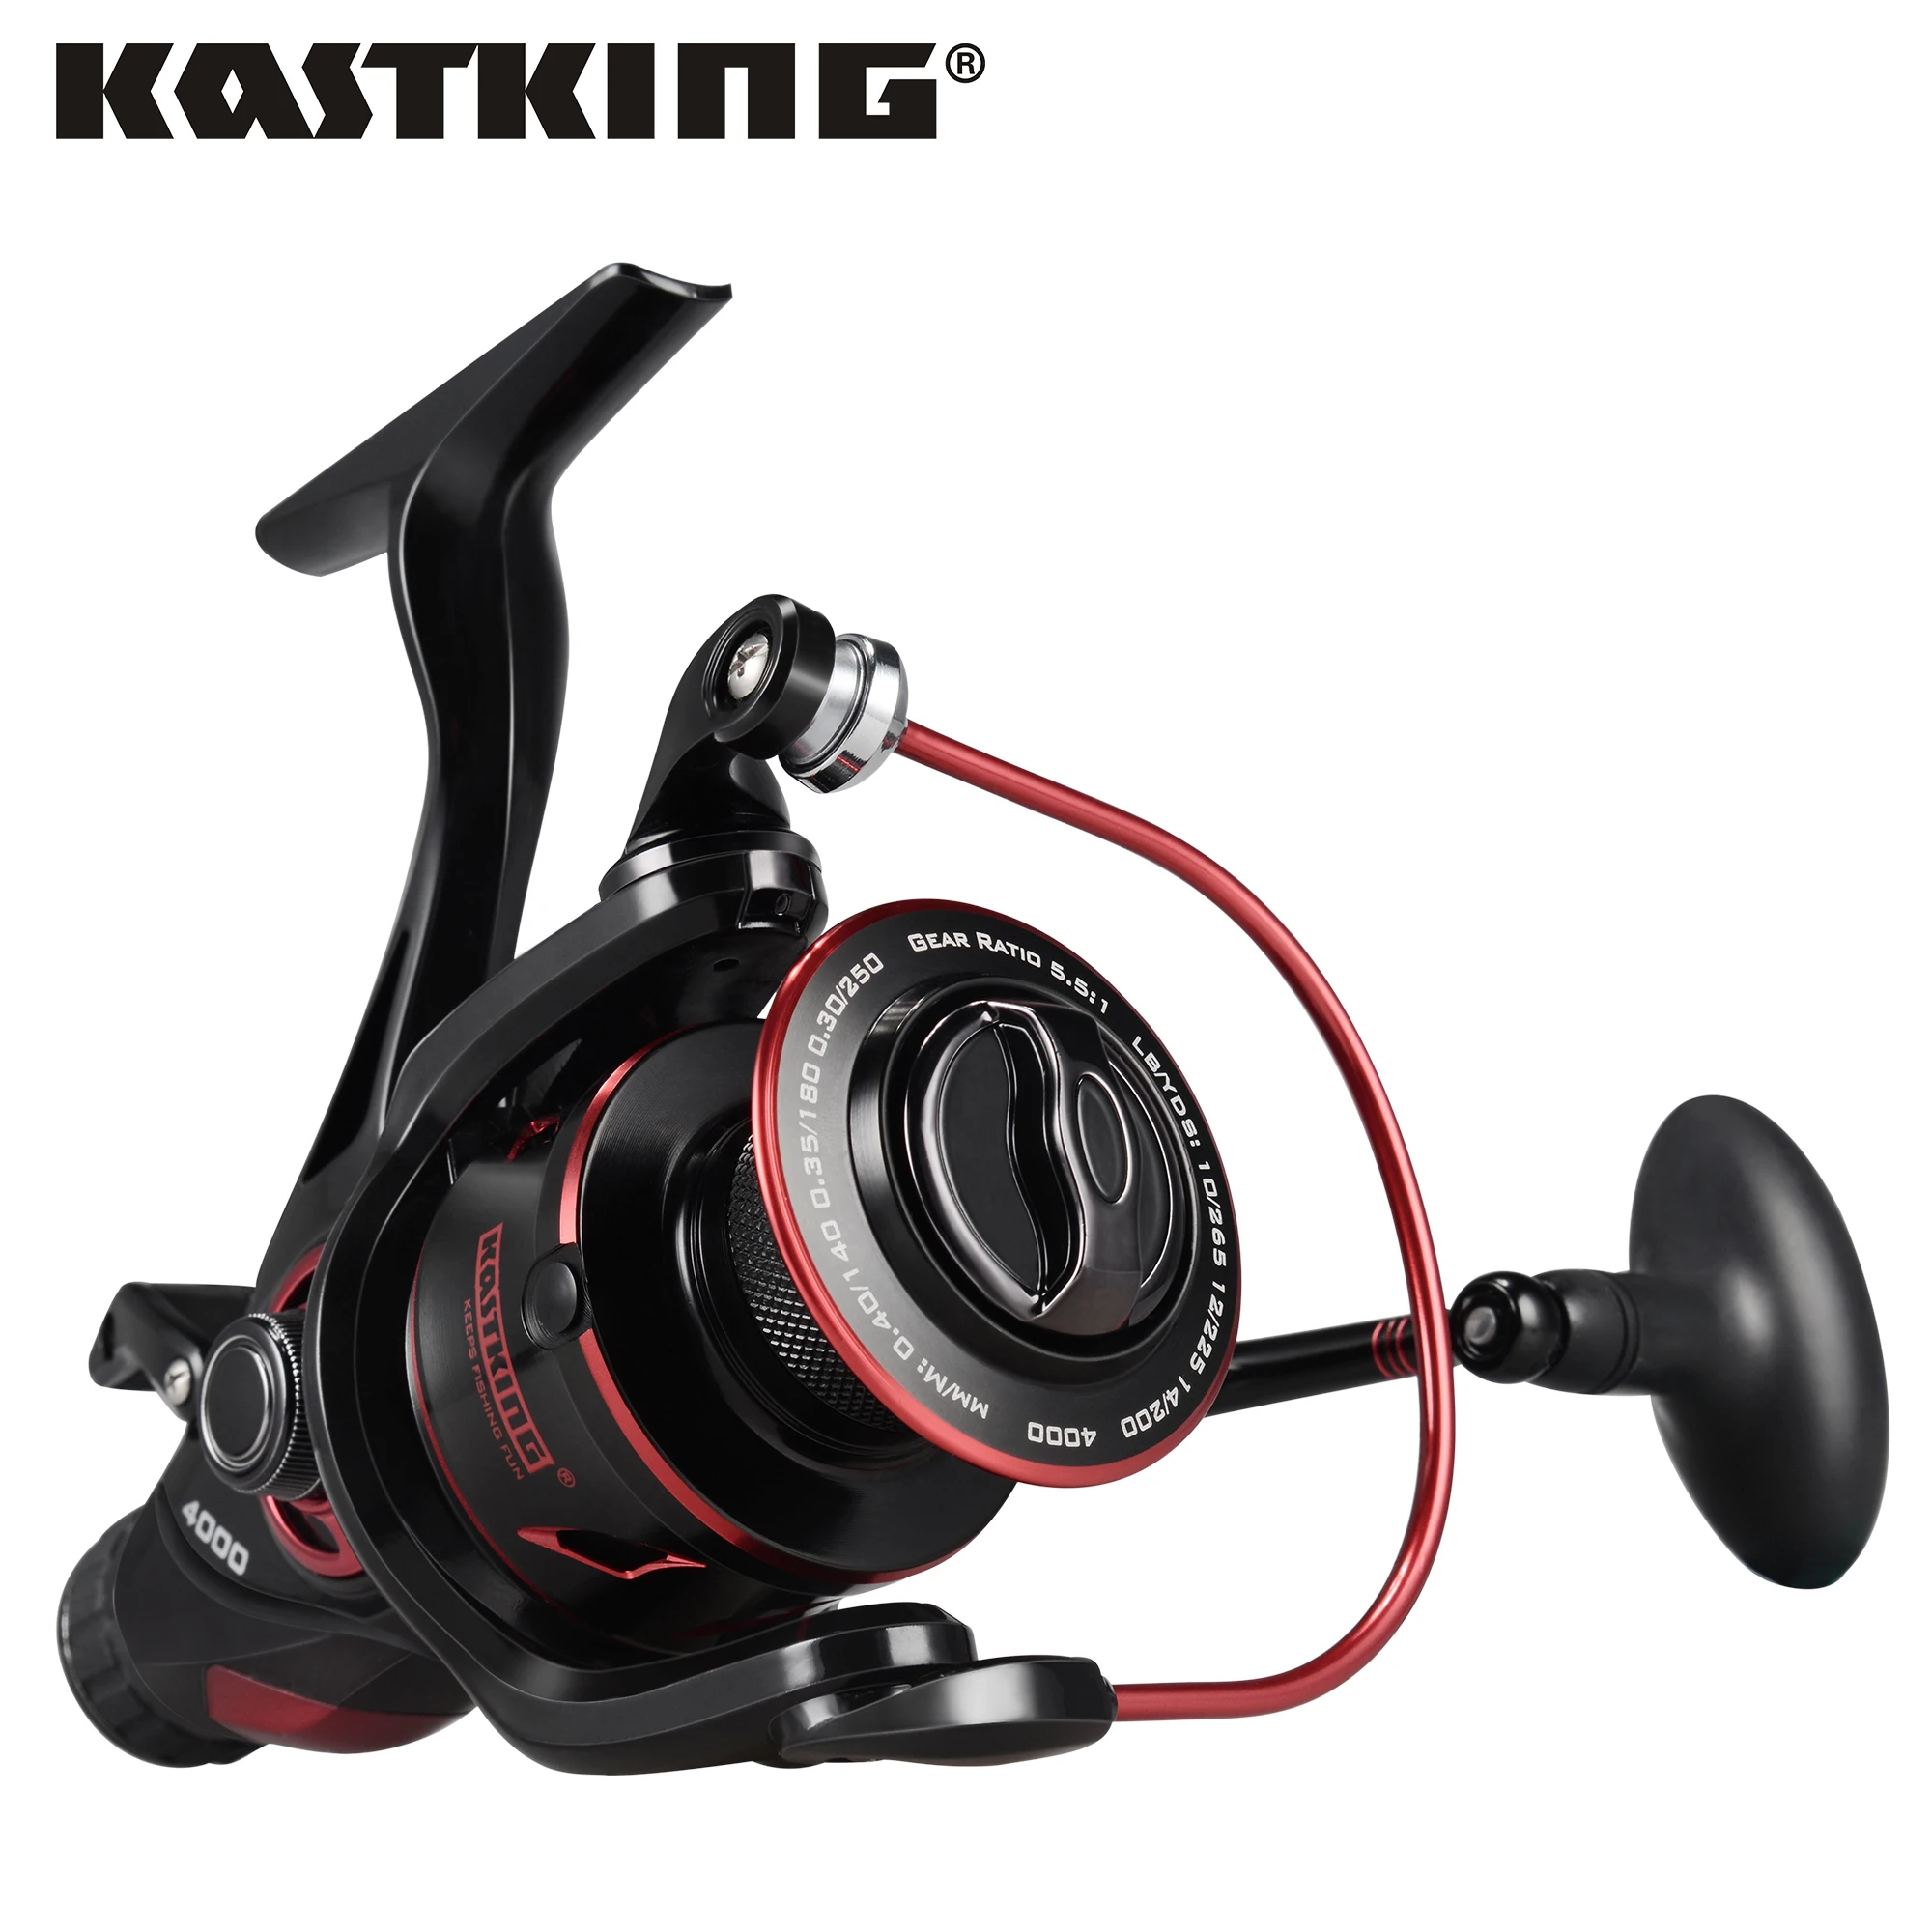 KastKing Sharky Baitfeeder III 12KG Drag Carp Fishing Reel with Extra Spool Front and Rear Drag System Freshwater Spinning Reel 1